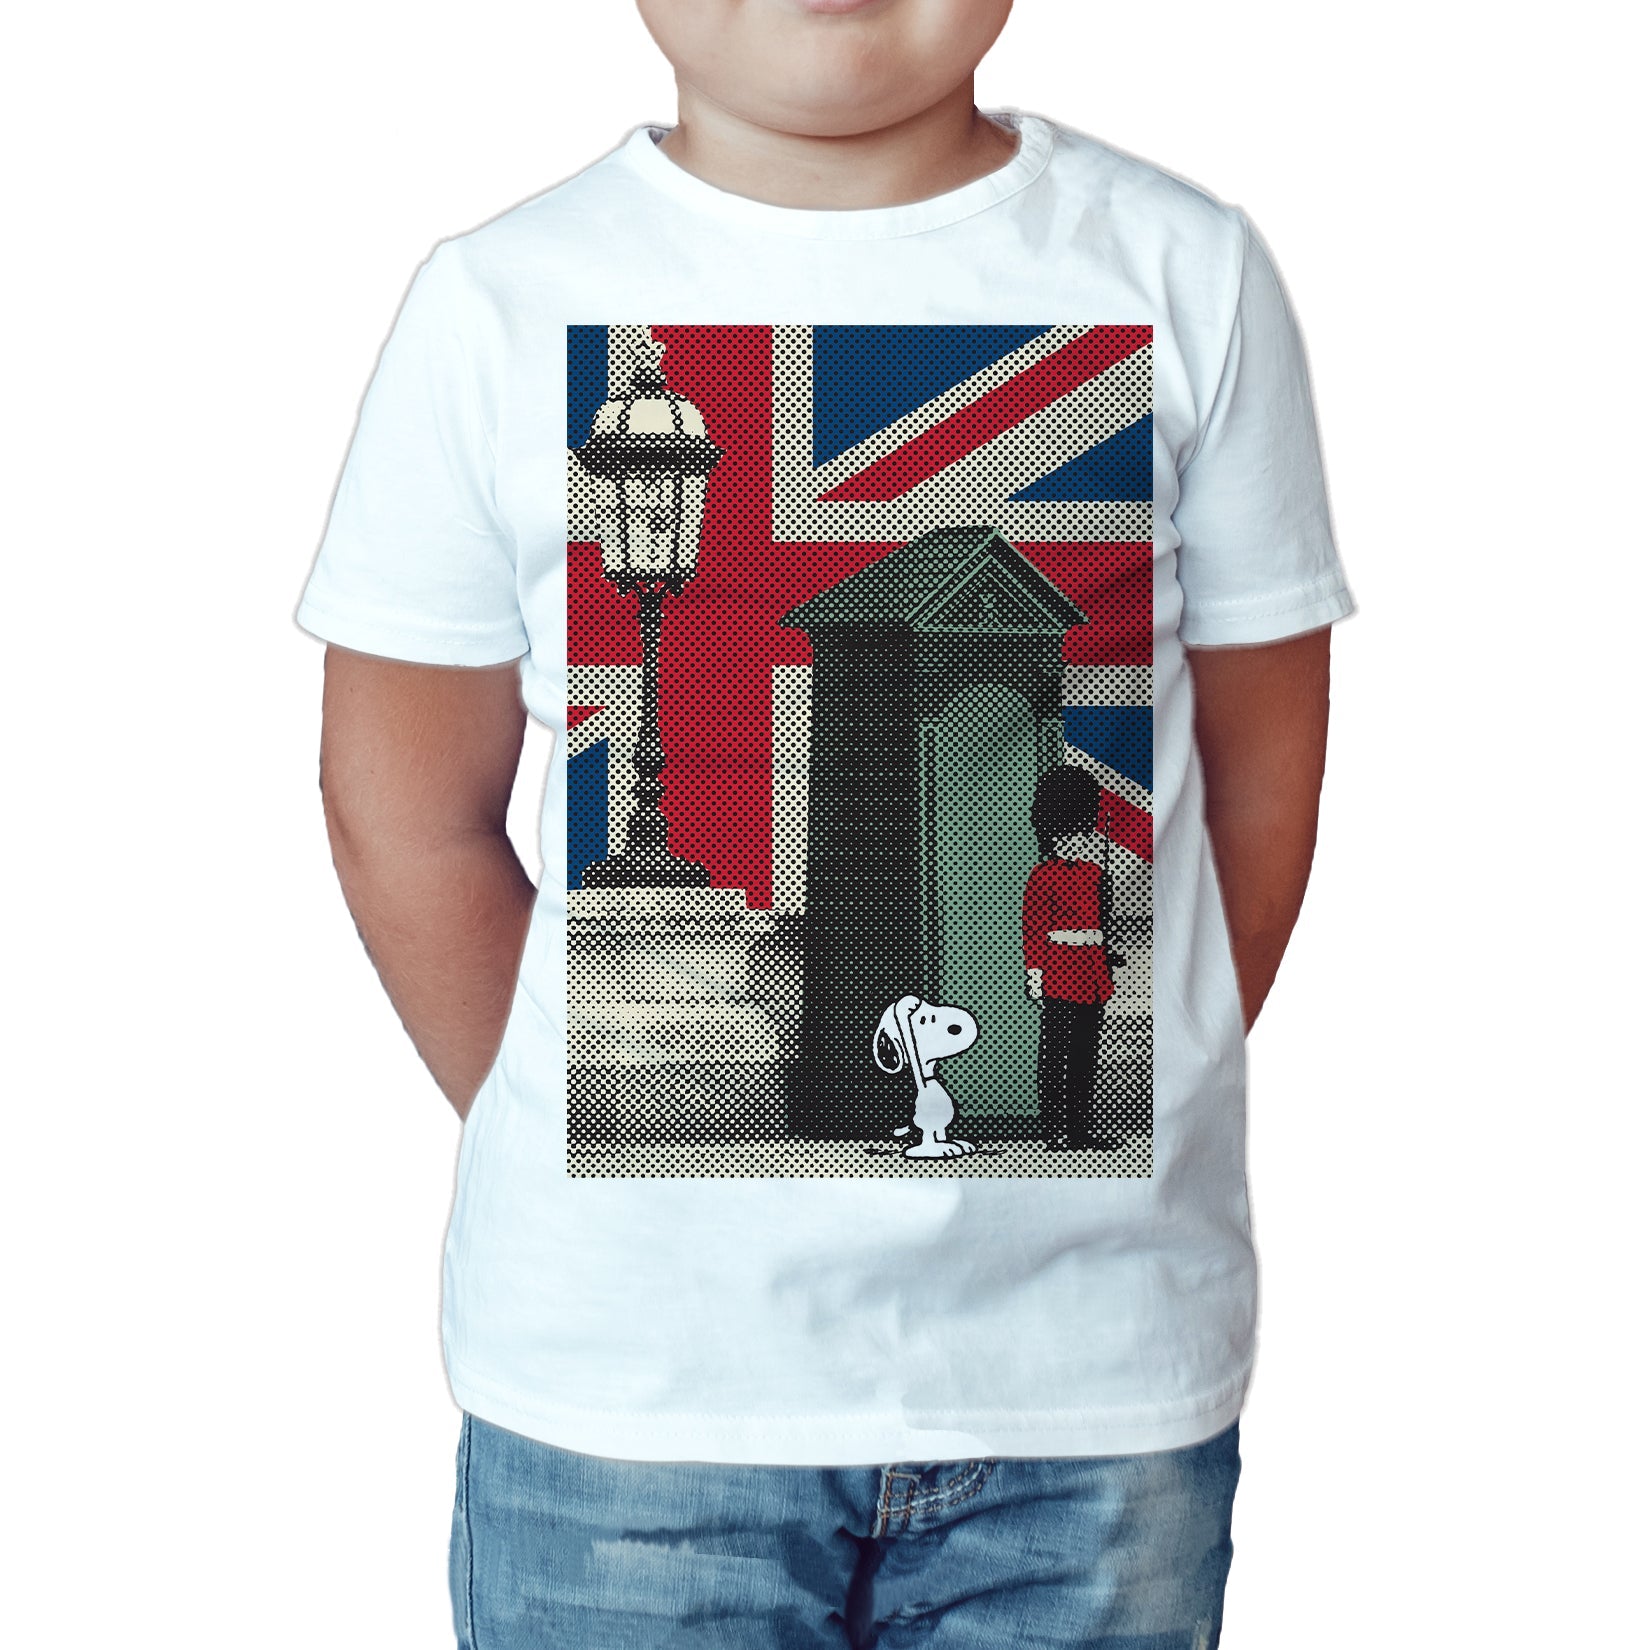 Peanuts Kids Snoopy Remix UK Beefeater Official Kid's T-Shirt